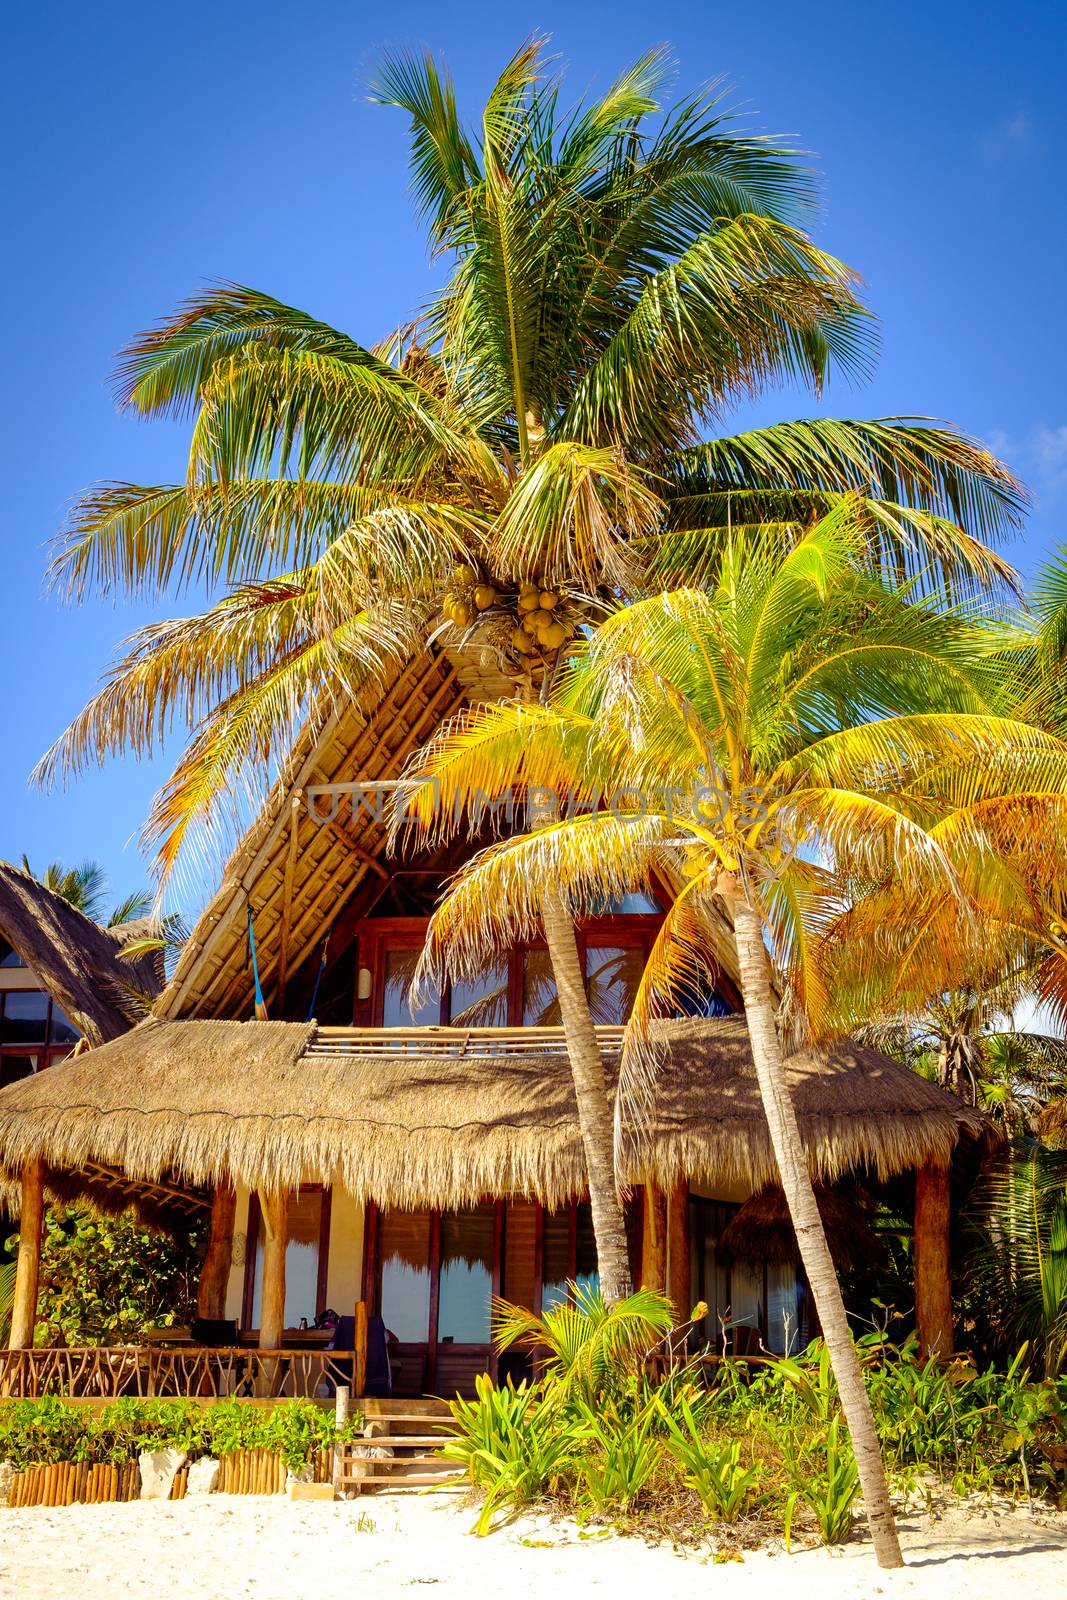 Tranquil scene of ocean coast hut and palm trees, Tulum, Mexico